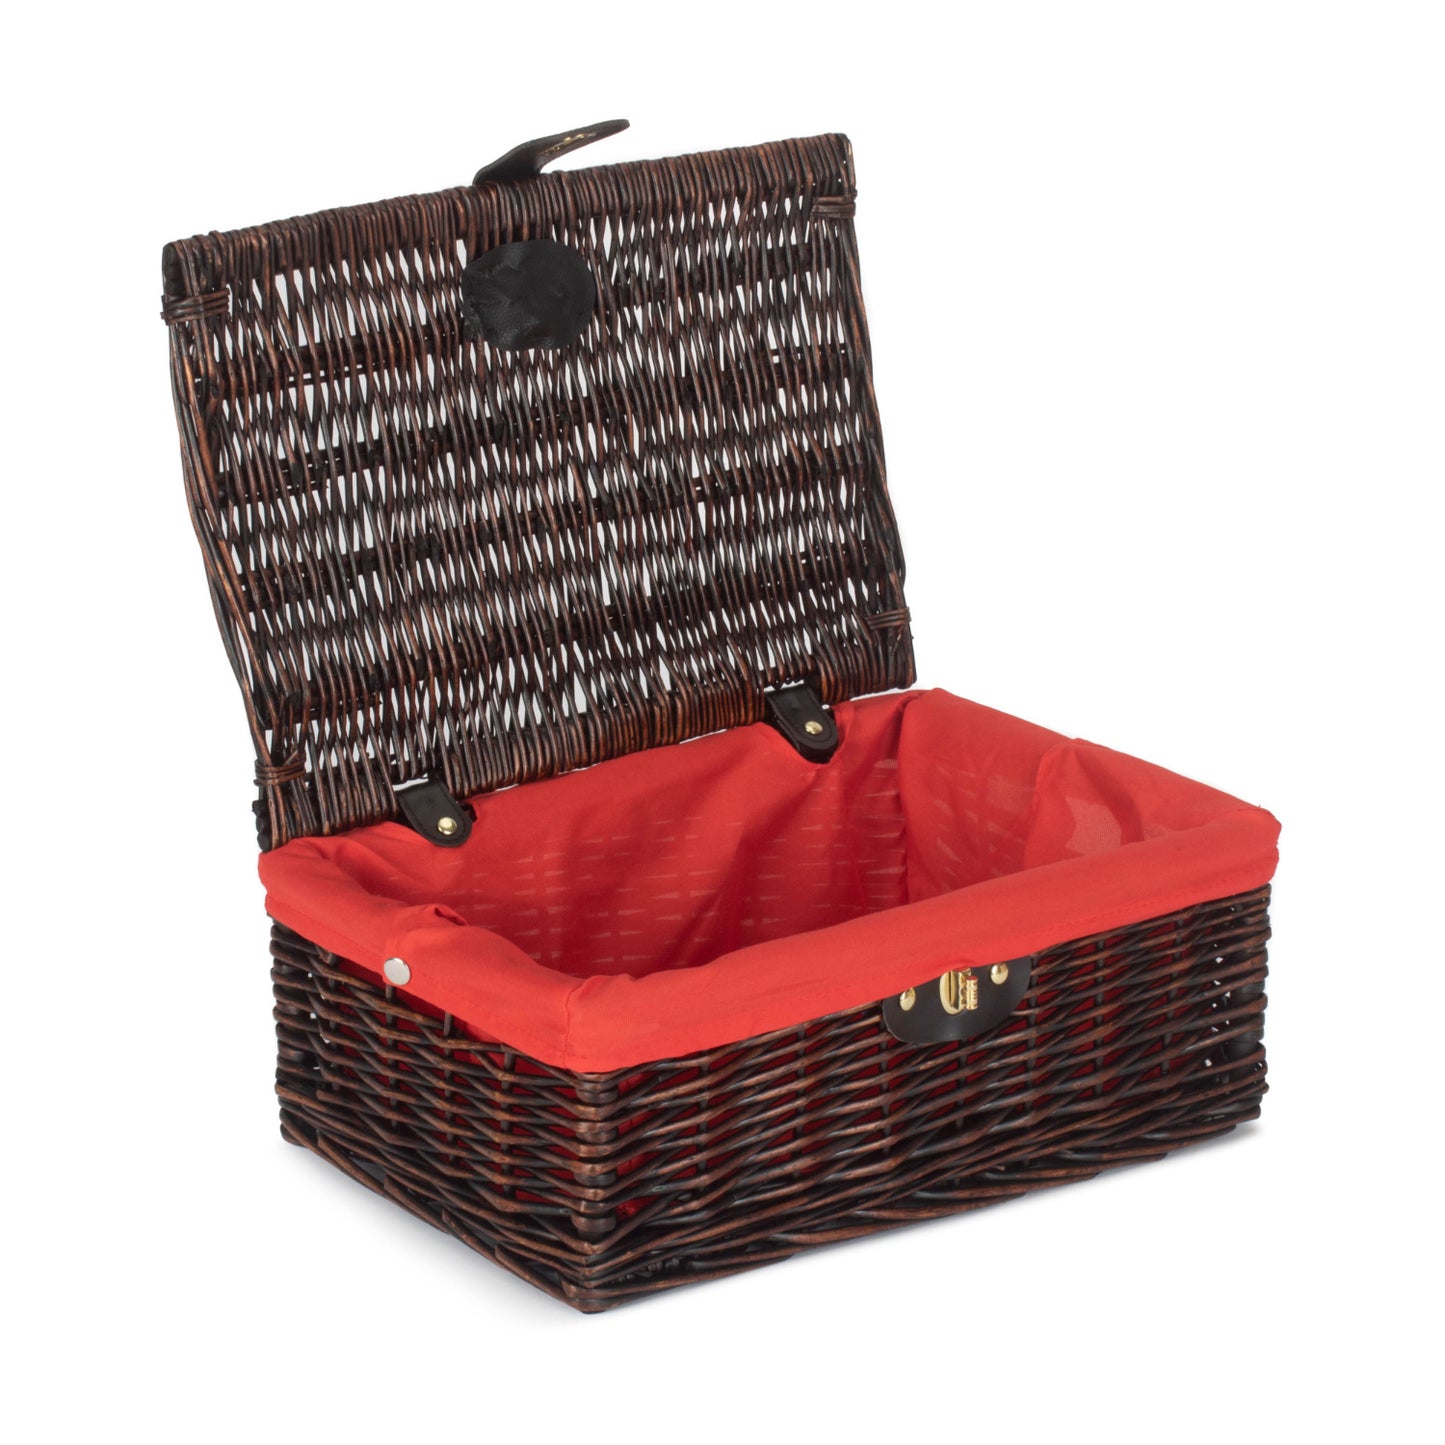 14 Inch Chocolate Brown Hamper With Red Lining